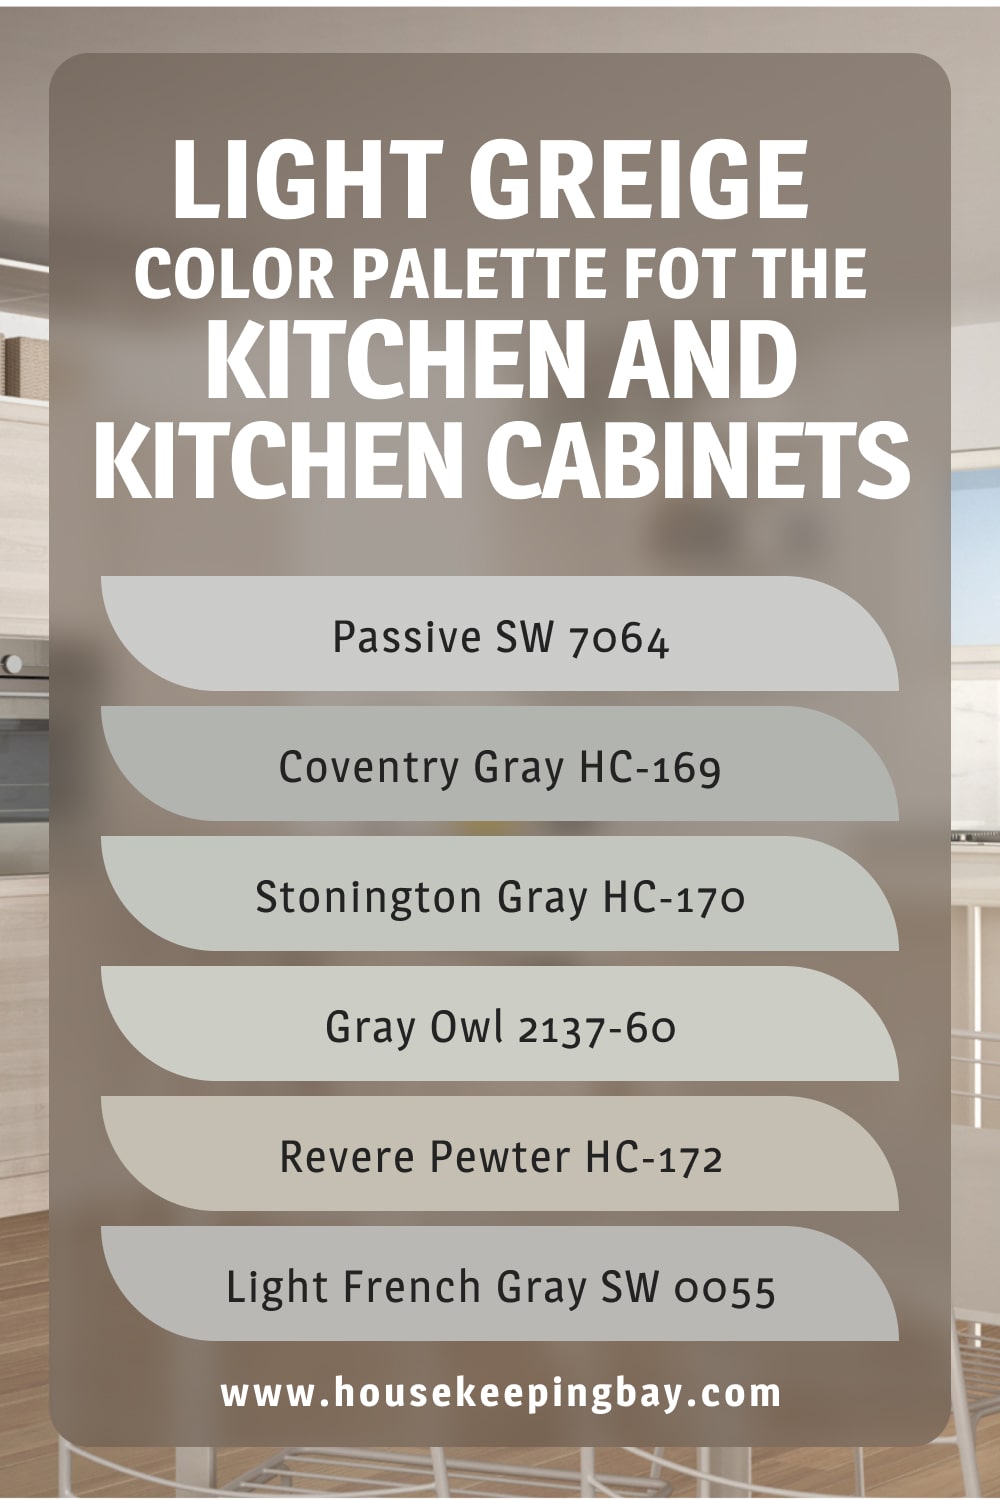 Light Greige Color Palette for the Kitchen and Kitchen Cabinets